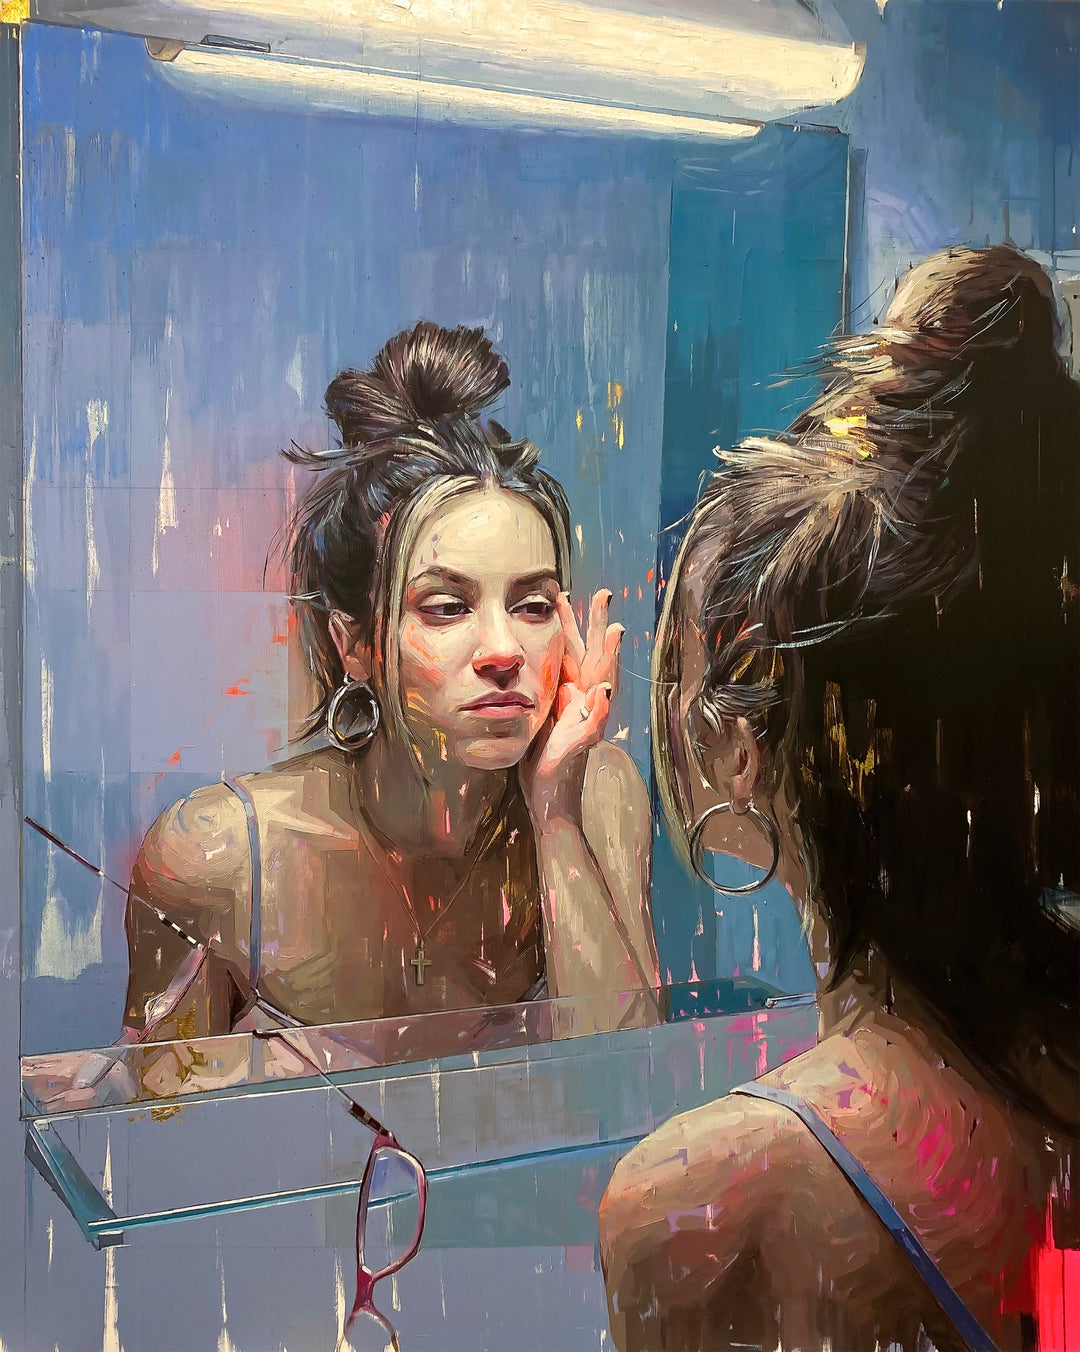 A captivating painting featuring a woman, created with acrylic and oil, as she gazes intently at her reflection in the mirror. This mesmerizing artwork, "Alba's Mirror, 2023" by Conrado López+, is created by Conrado López.